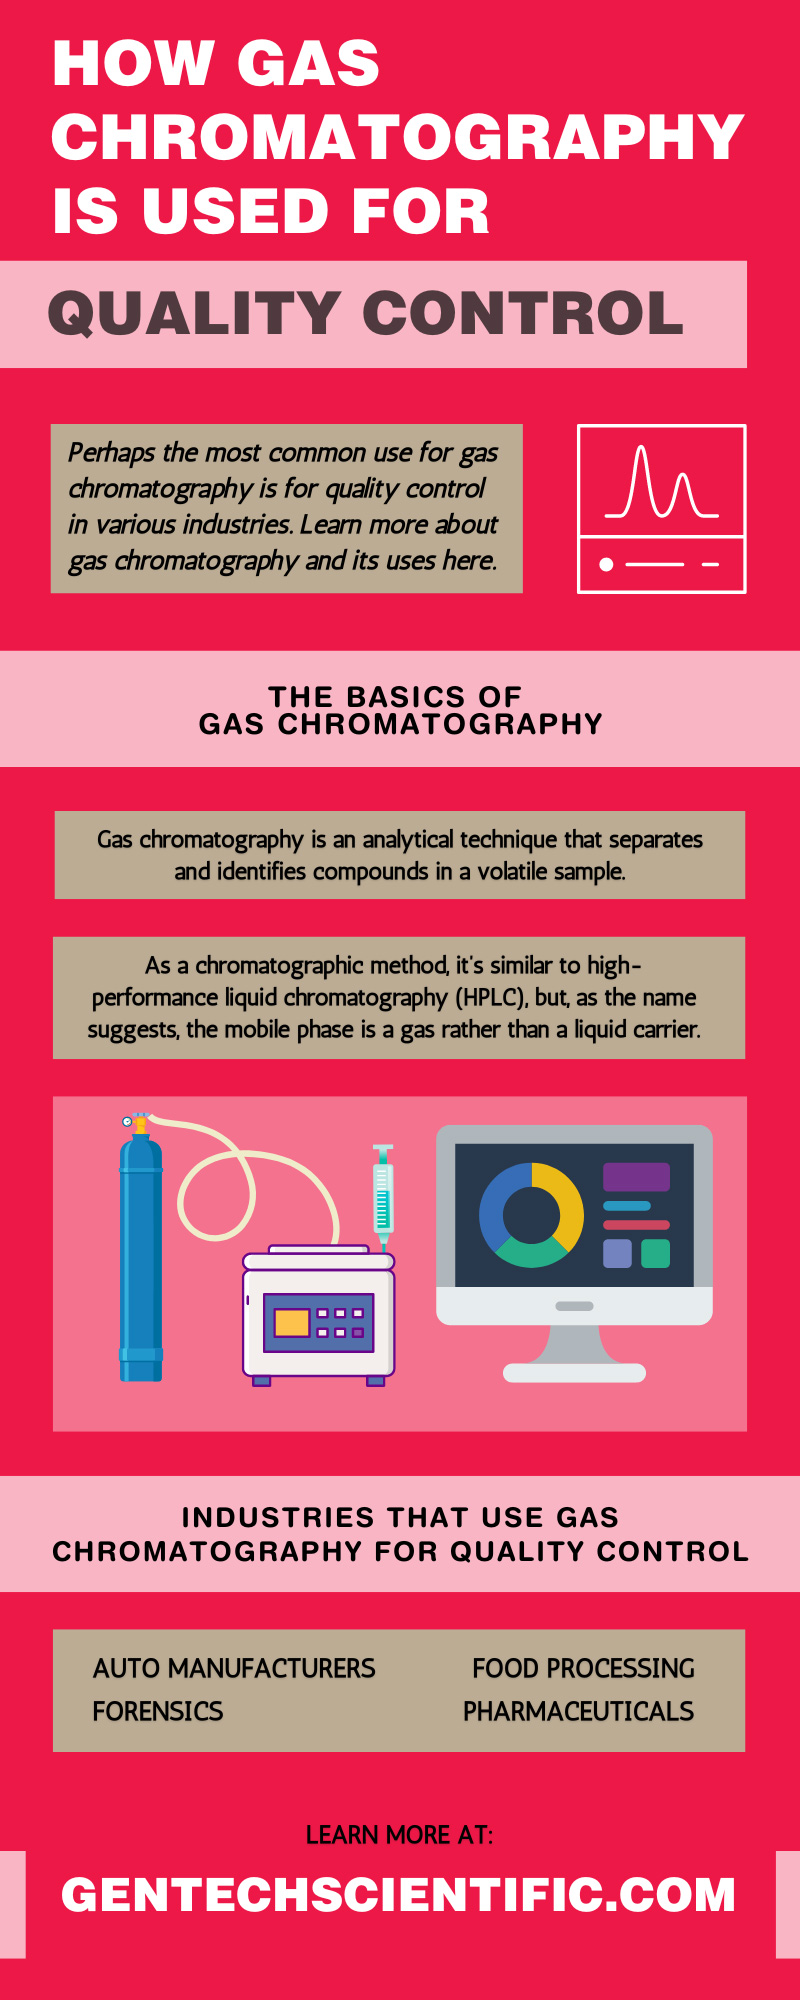 How Gas Chromatography Is Used for Quality Control